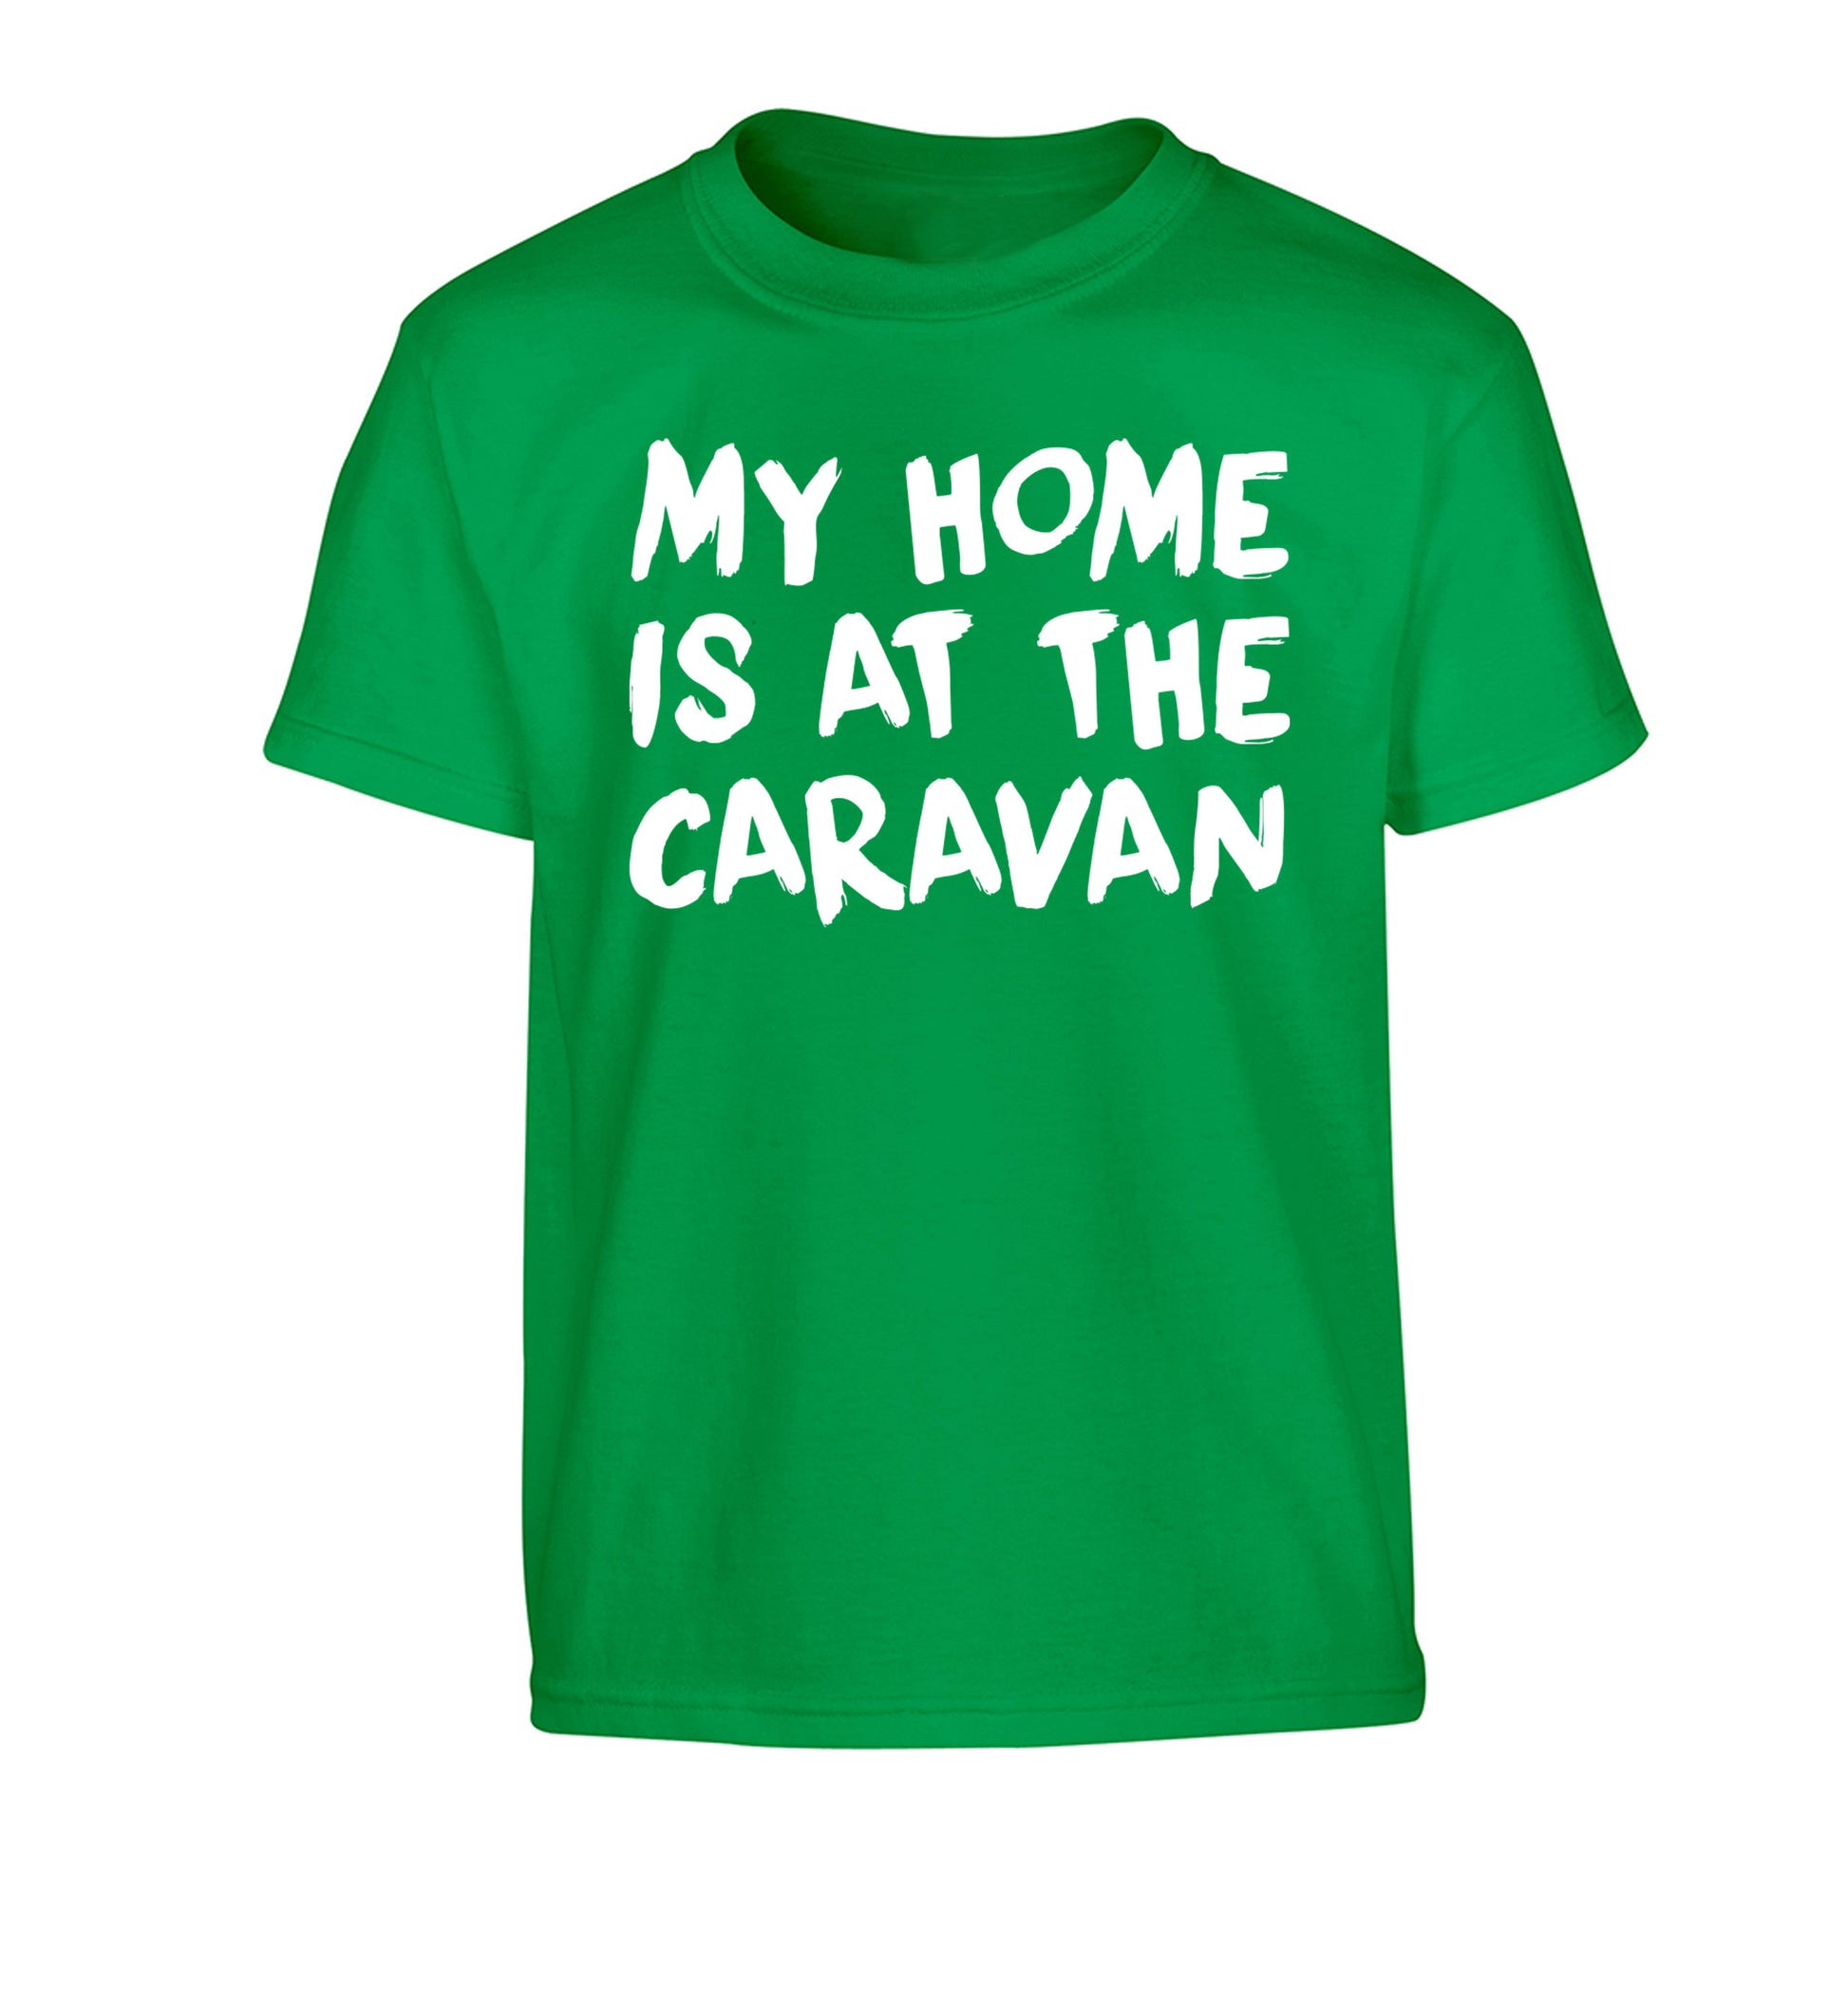 My home is at the caravan Children's green Tshirt 12-14 Years